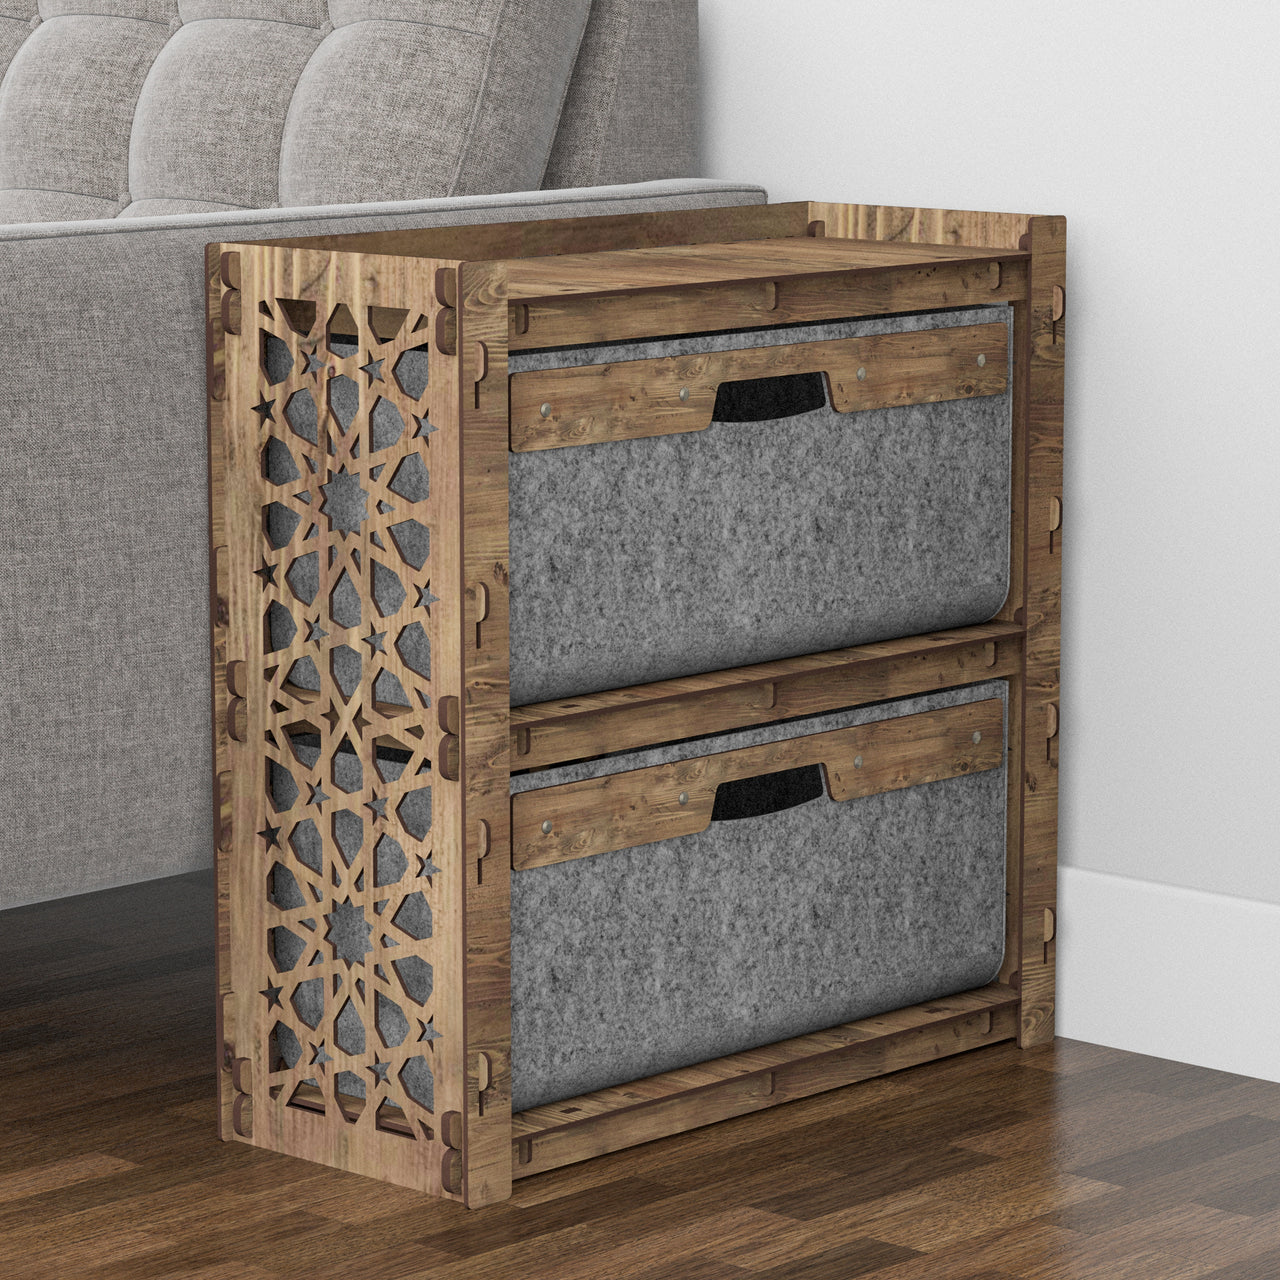 Arabic Side Table, End Table 2 Drawers [2 LARGE GRAY BINS]